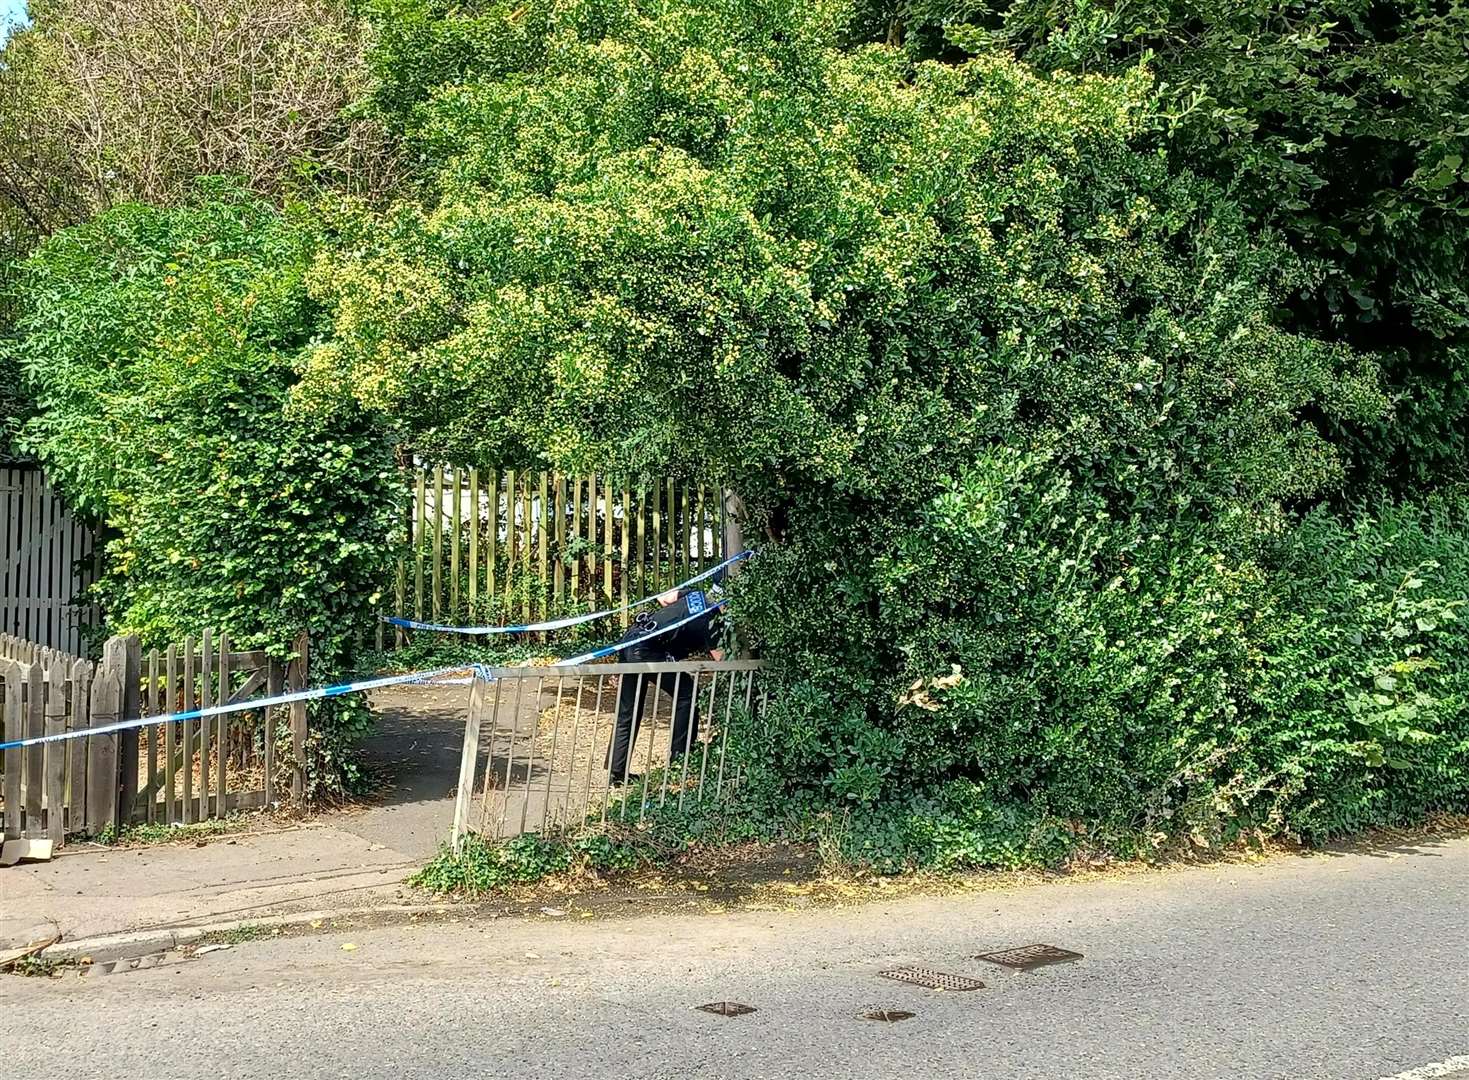 Officers at the time were seen searching through bushes